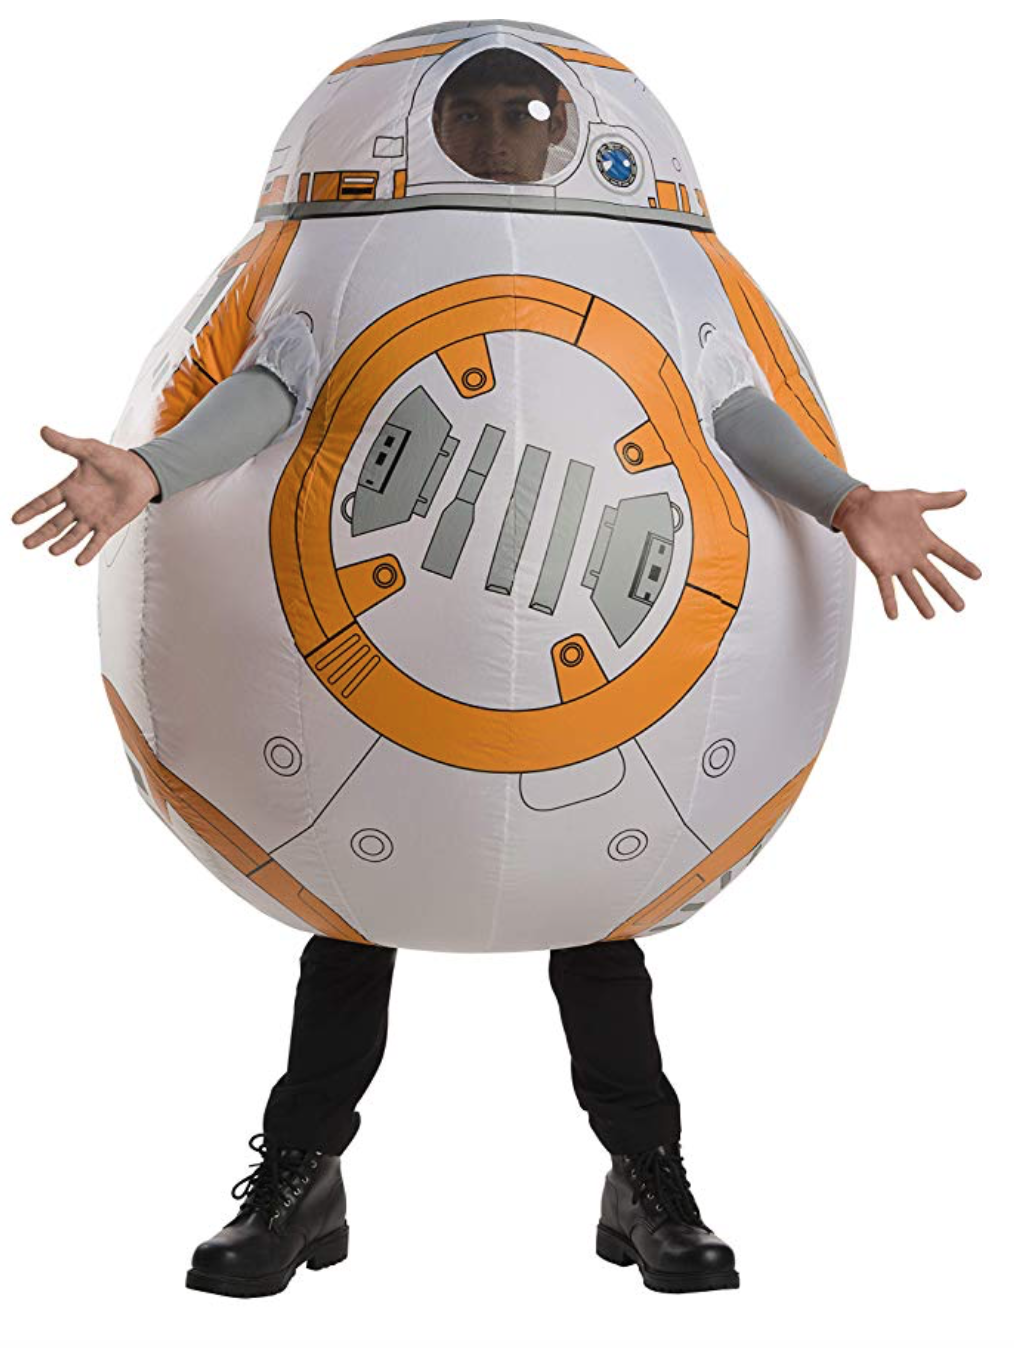 BB-8 Inflatable costume from Amazon.com